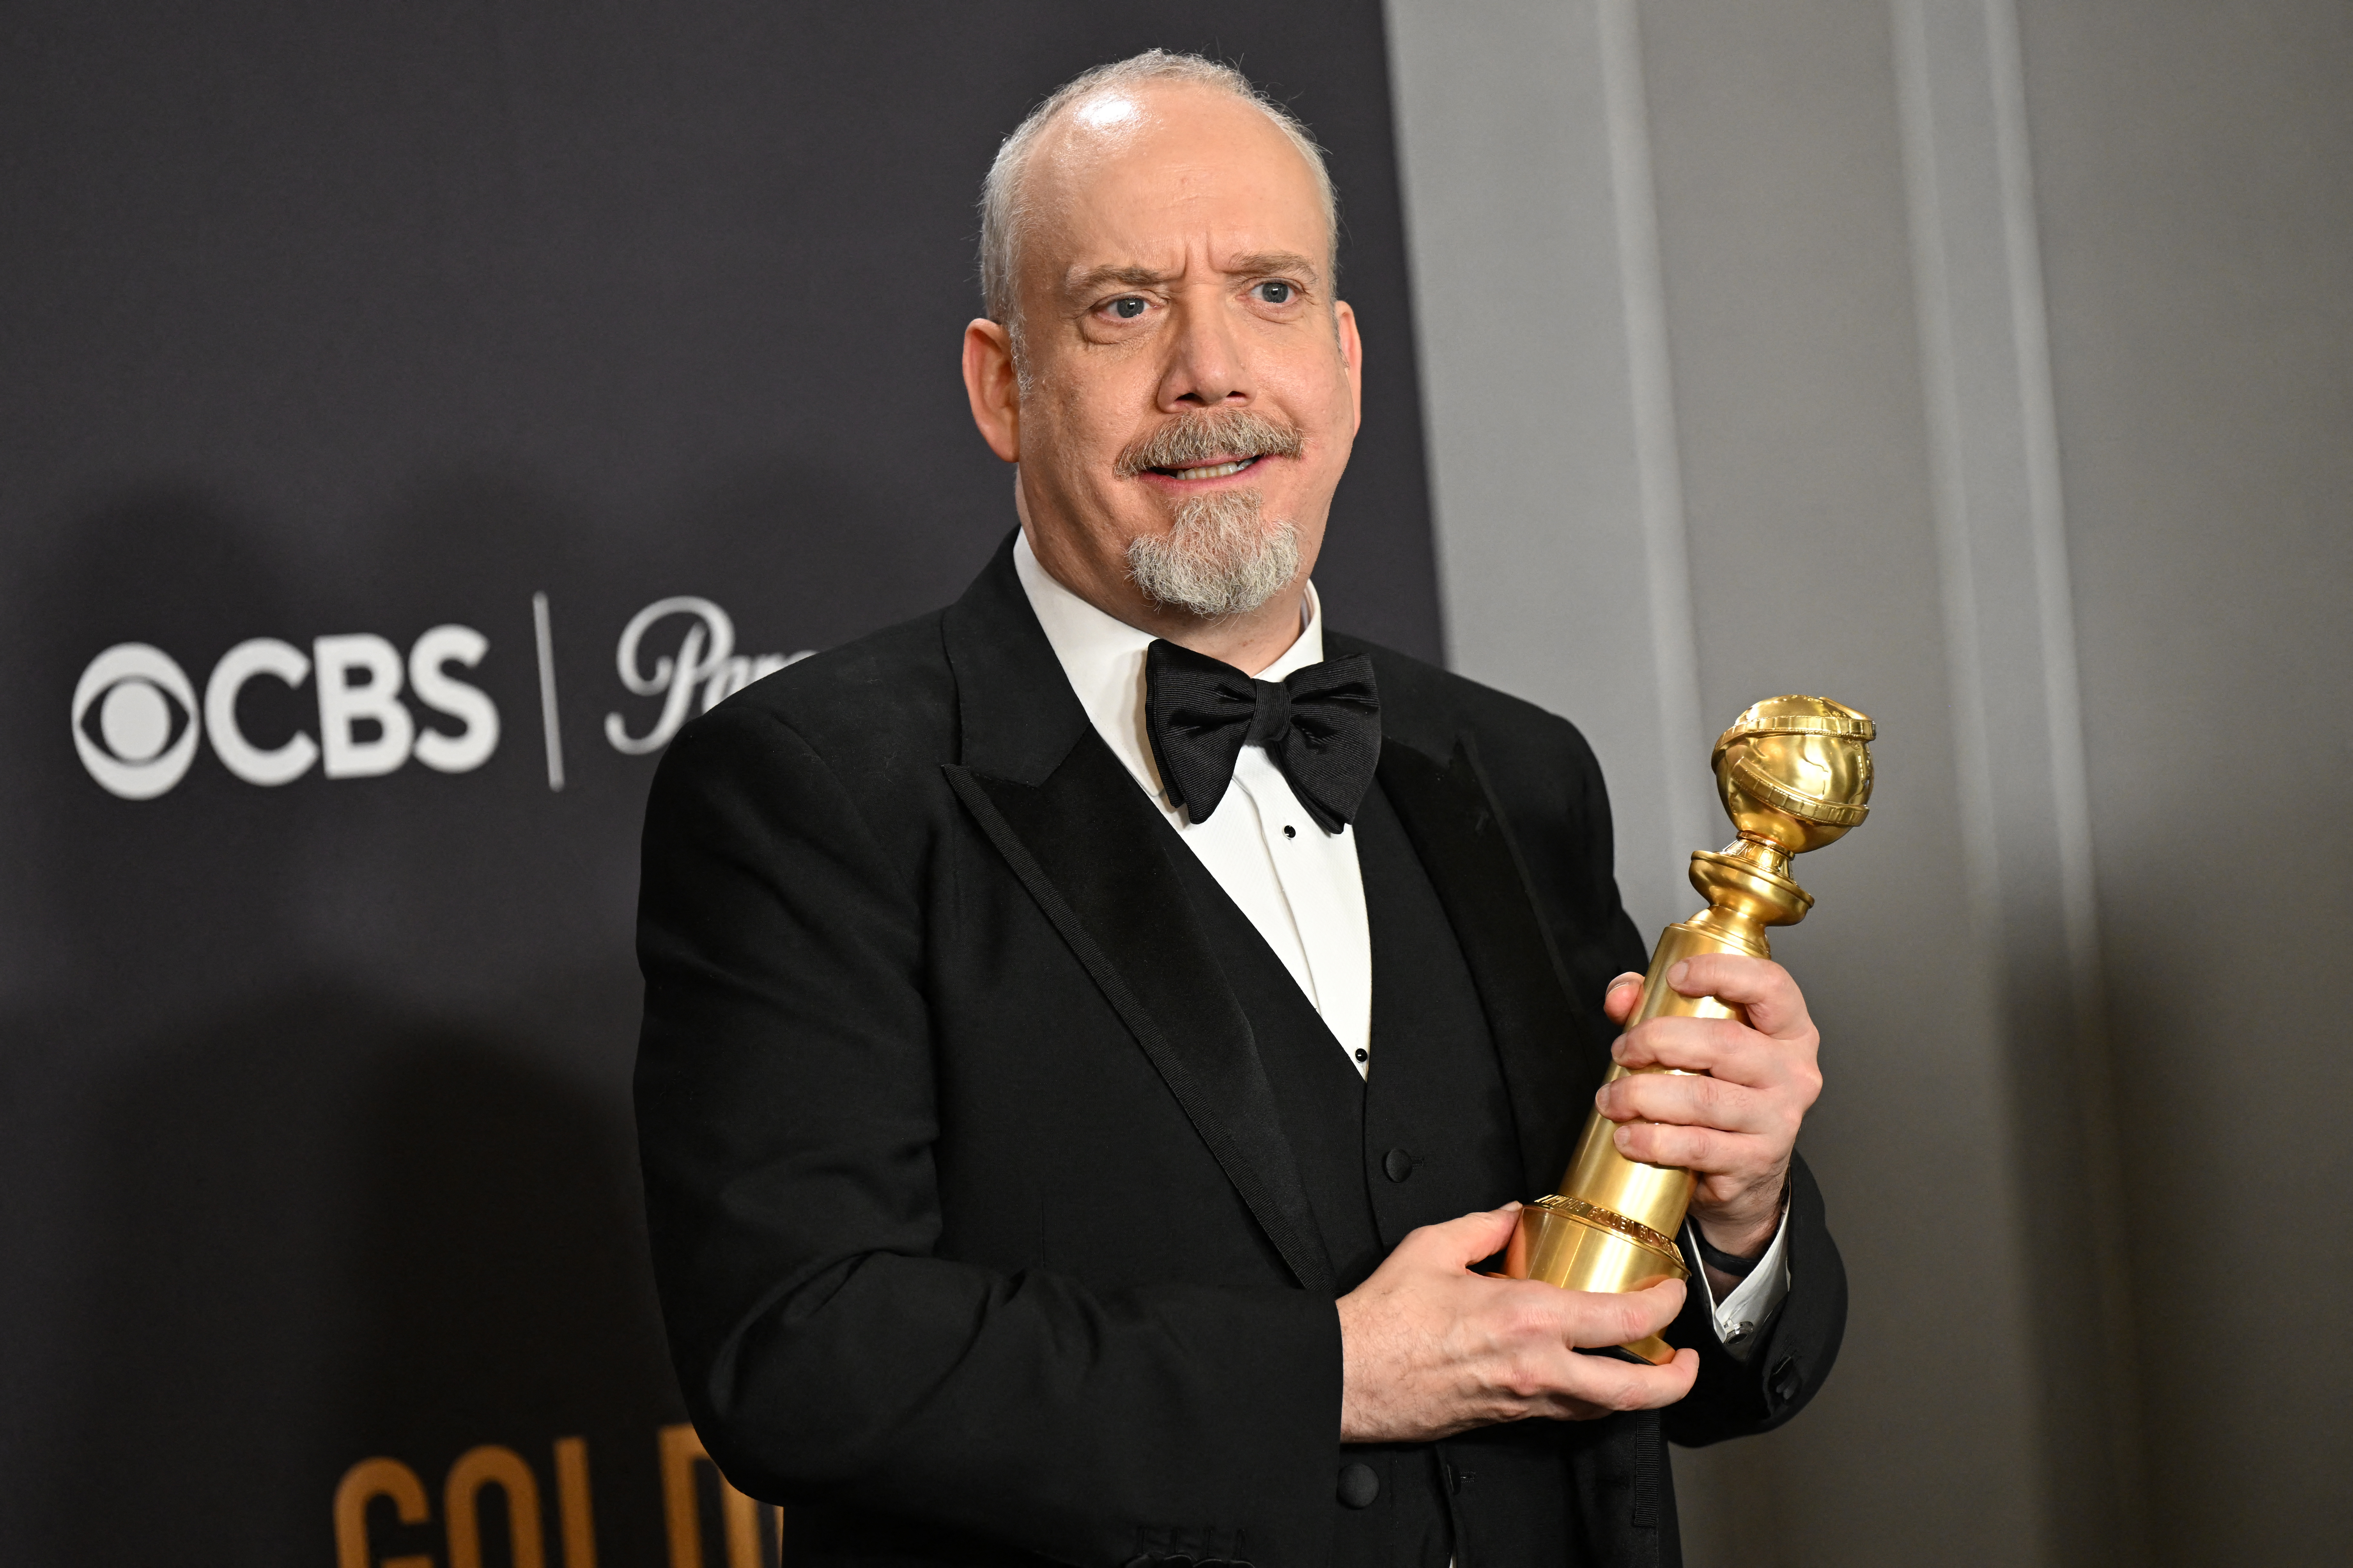 A male actor wearing a tuxedo poses with a Golden Globe award.